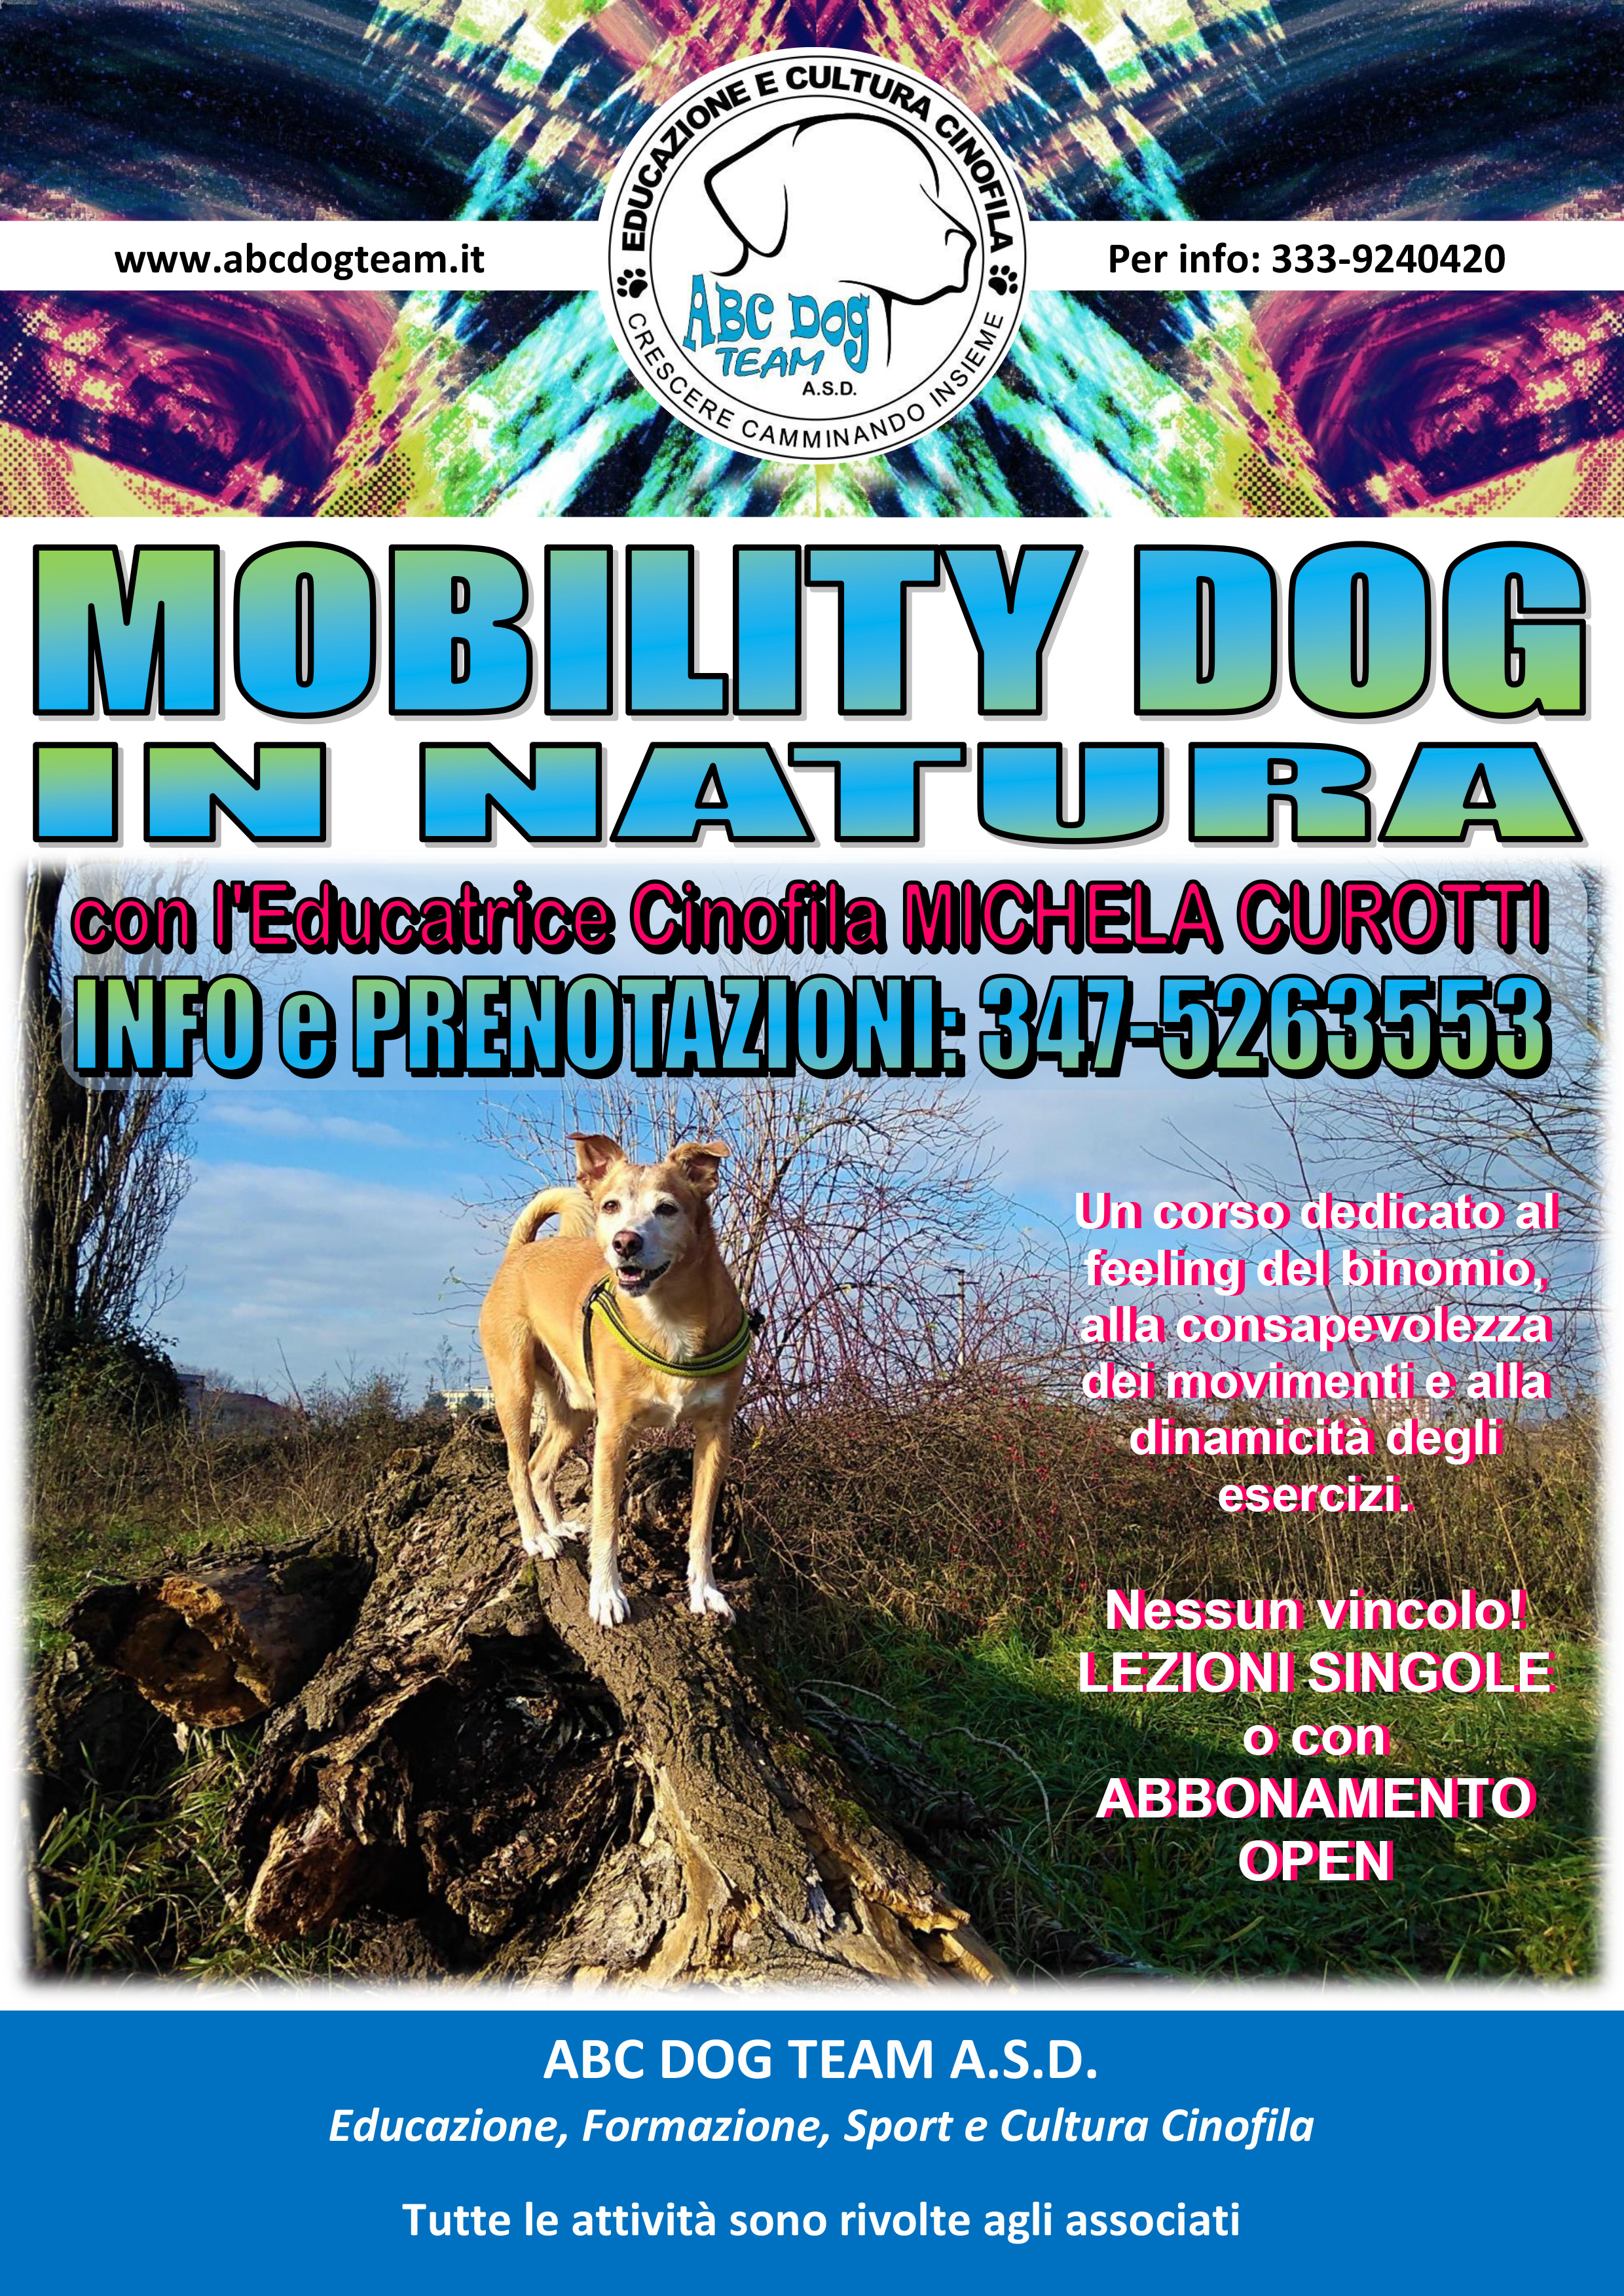 Abc Dog Team Mobility dog in natura Monza